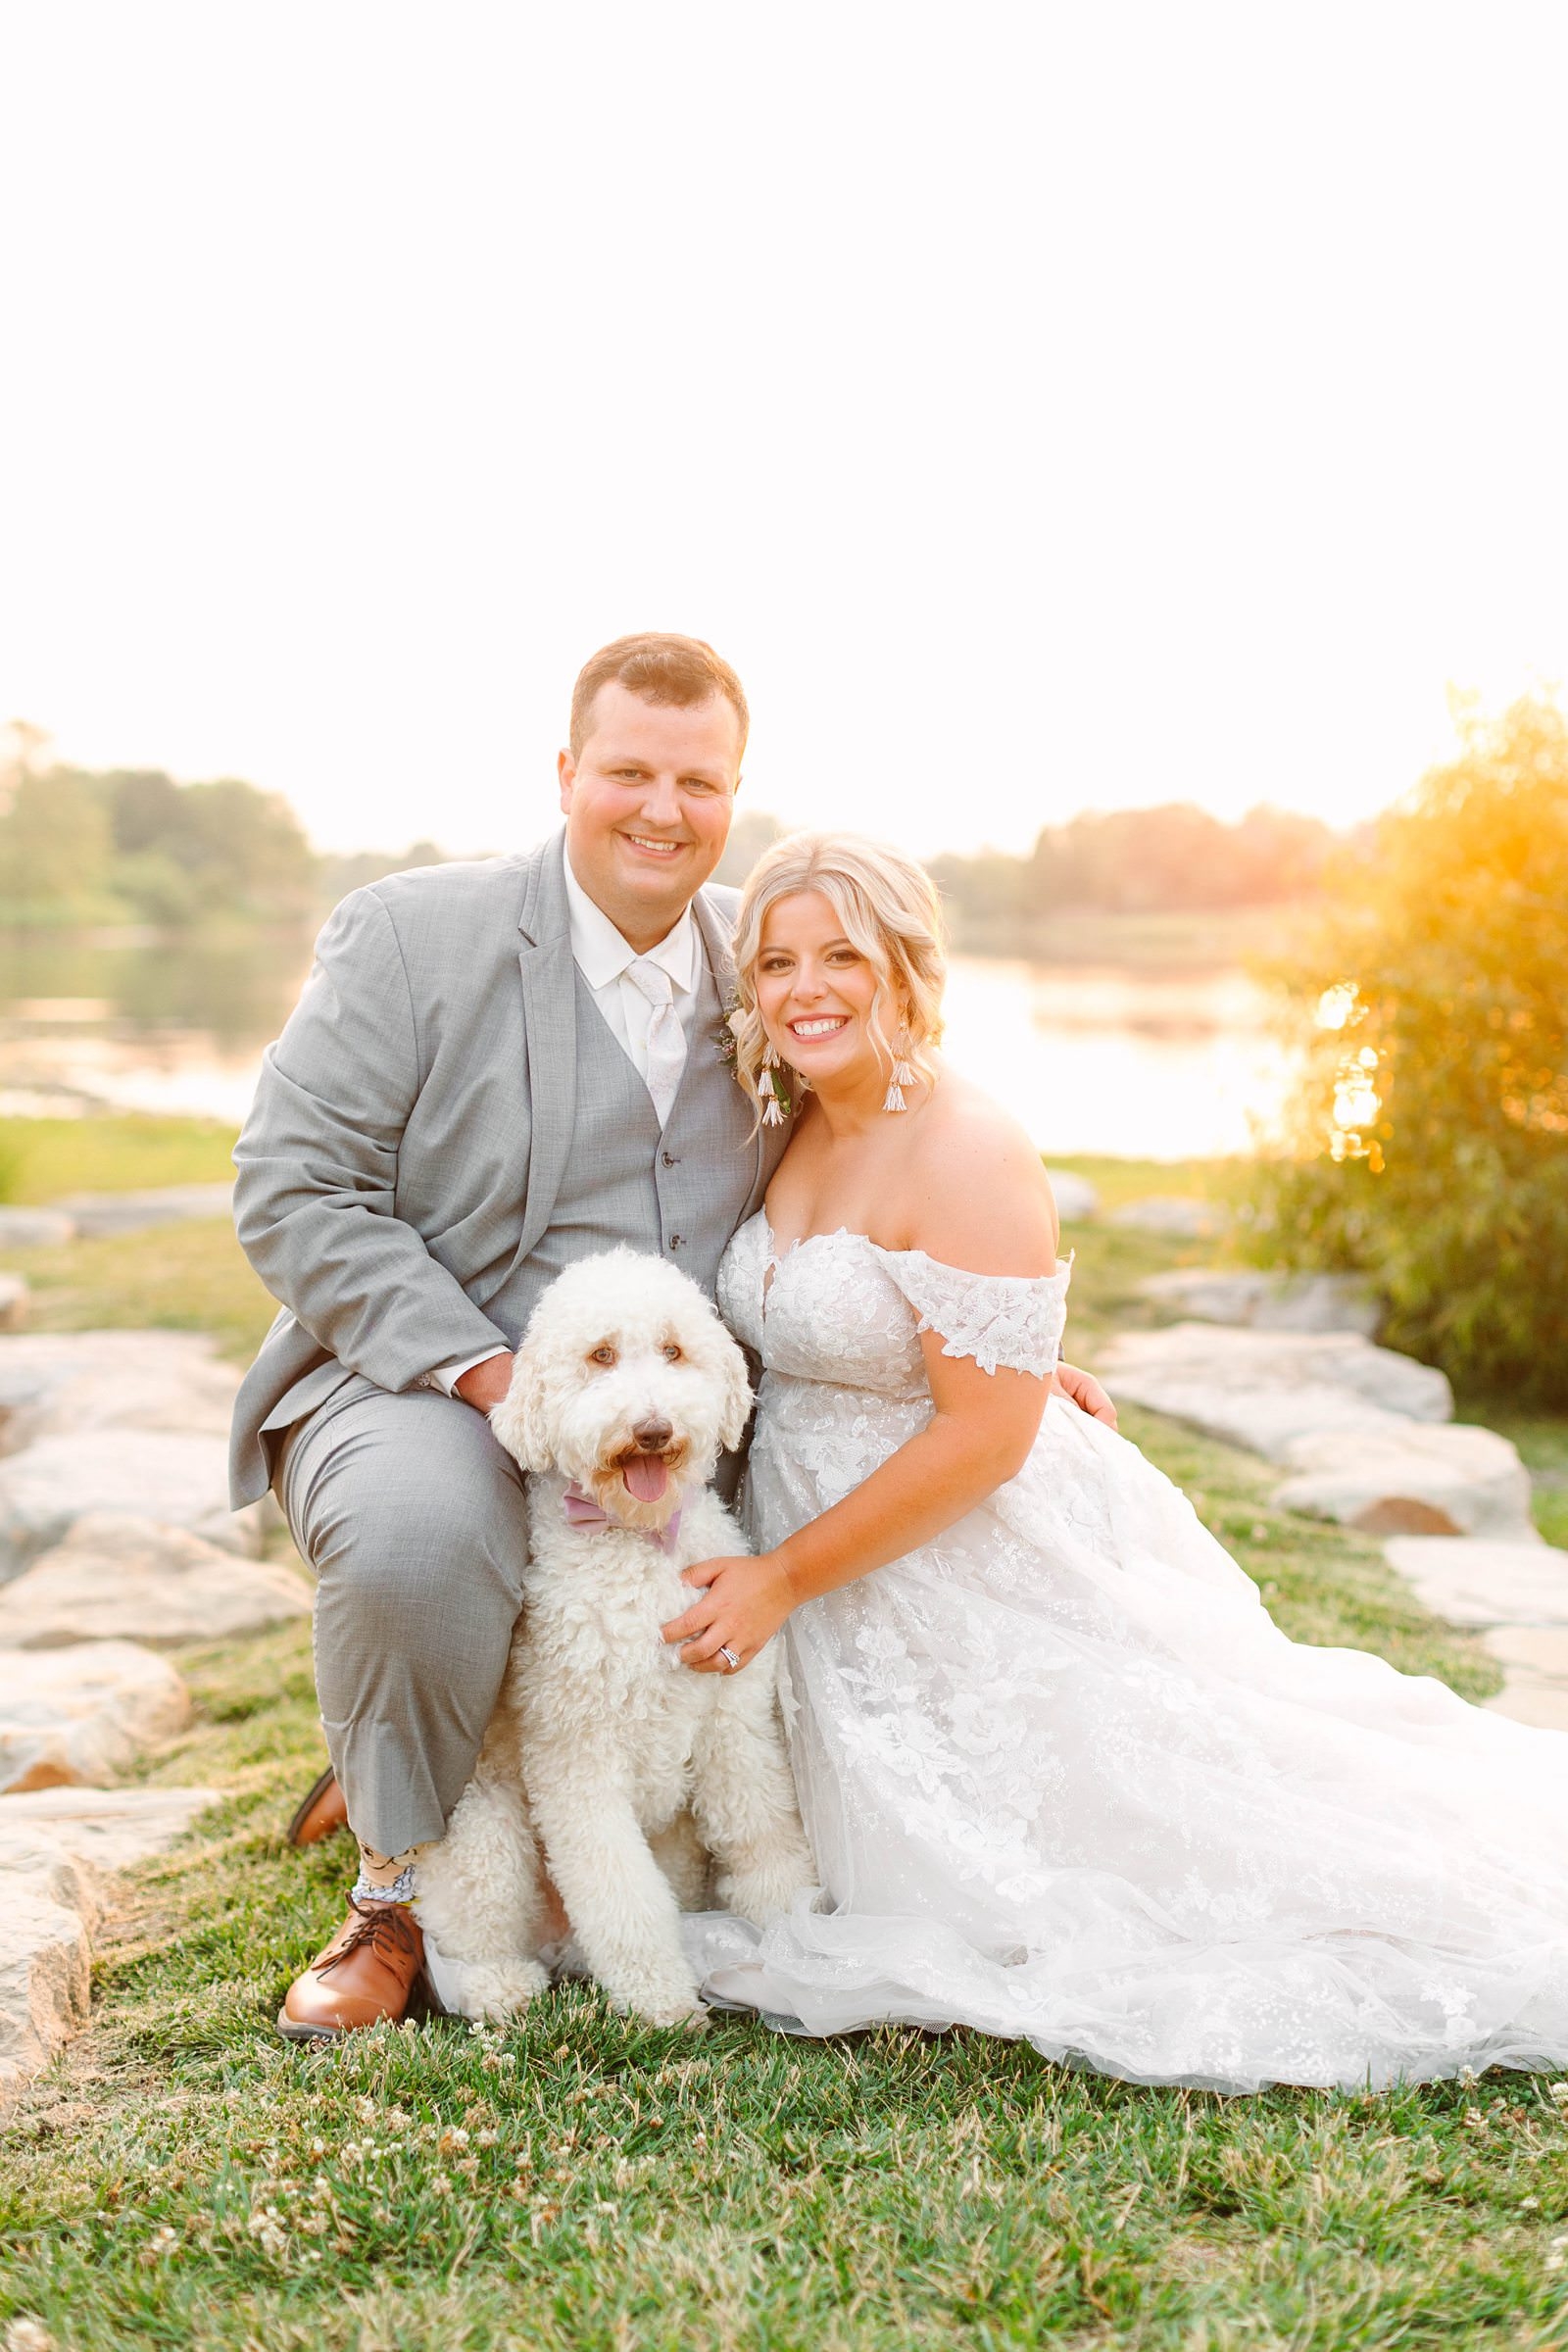 A Sunny Summer Wedding at Friedman Park in Newburgh Indiana | Paige and Dylan | Bret and Brandie Photography180.jpg